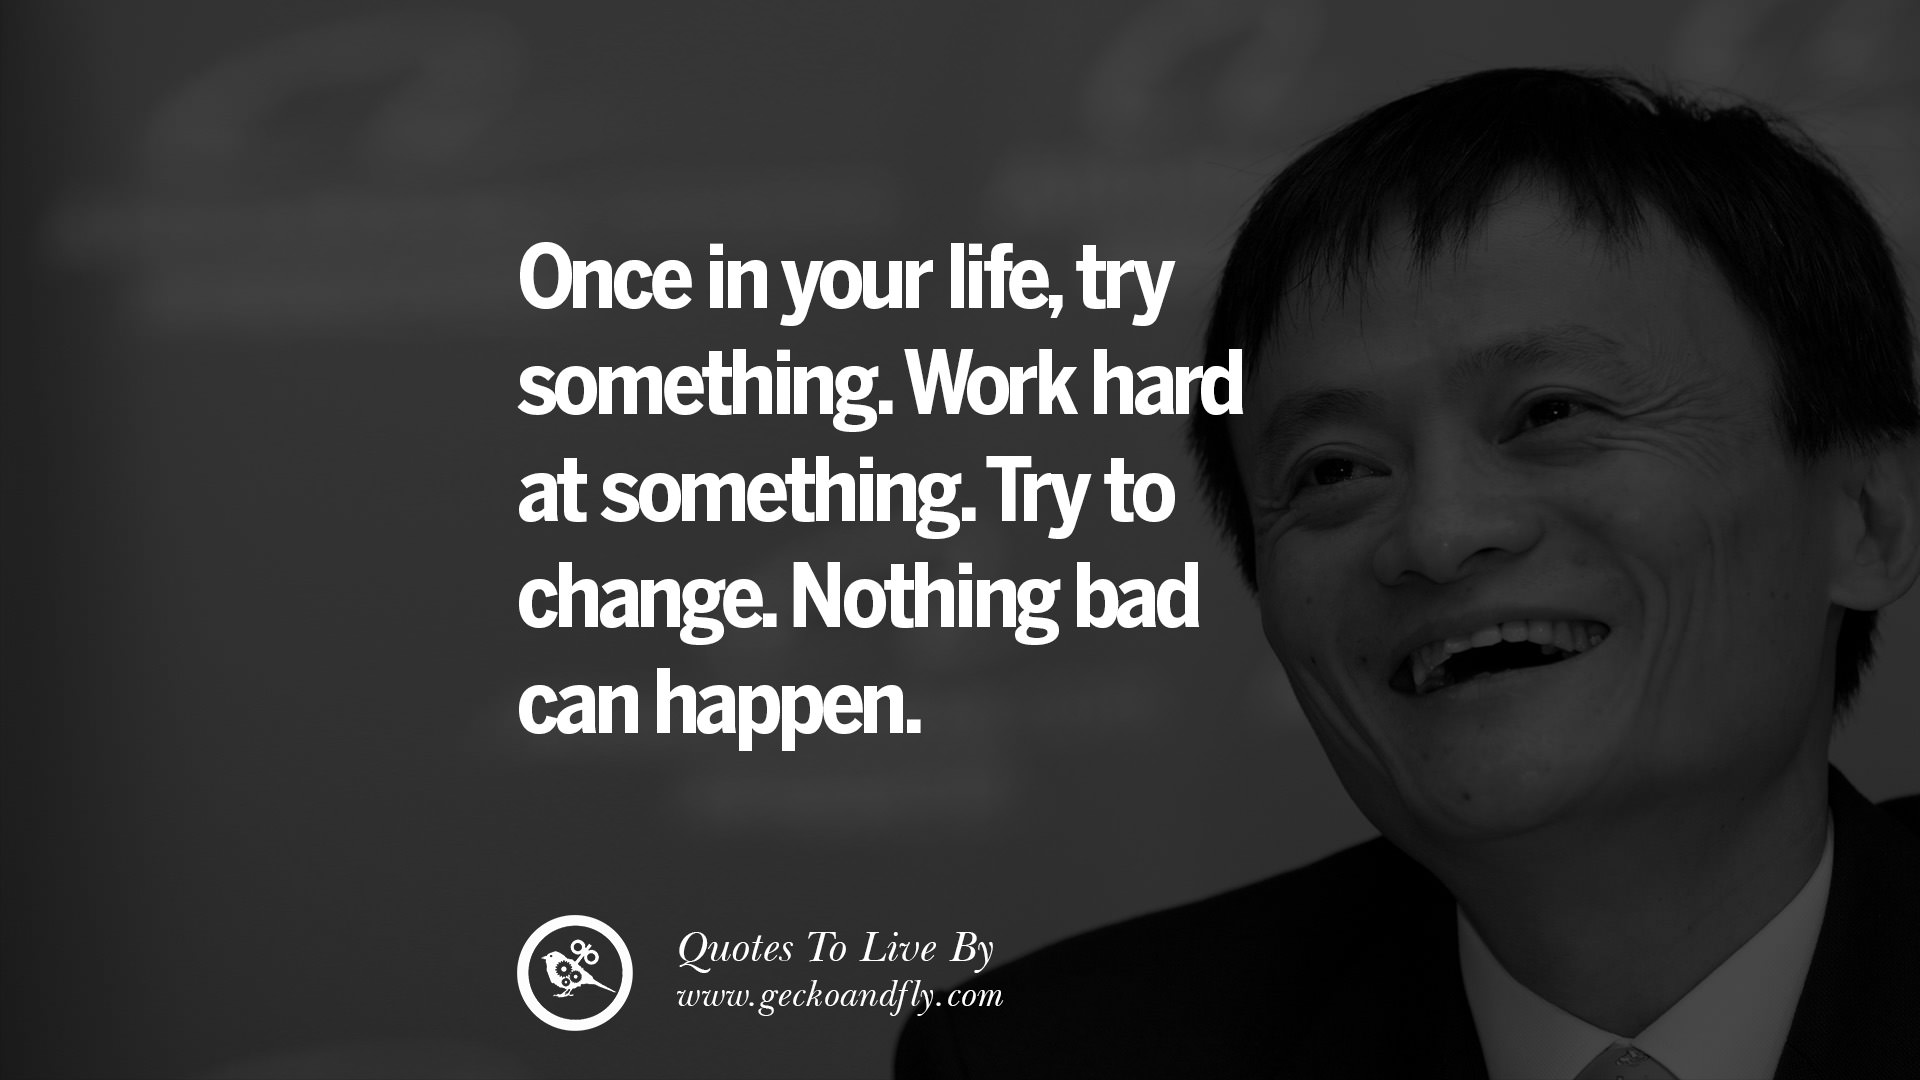 ce in your life try something Work hard at something Try to change Nothing bad can happen